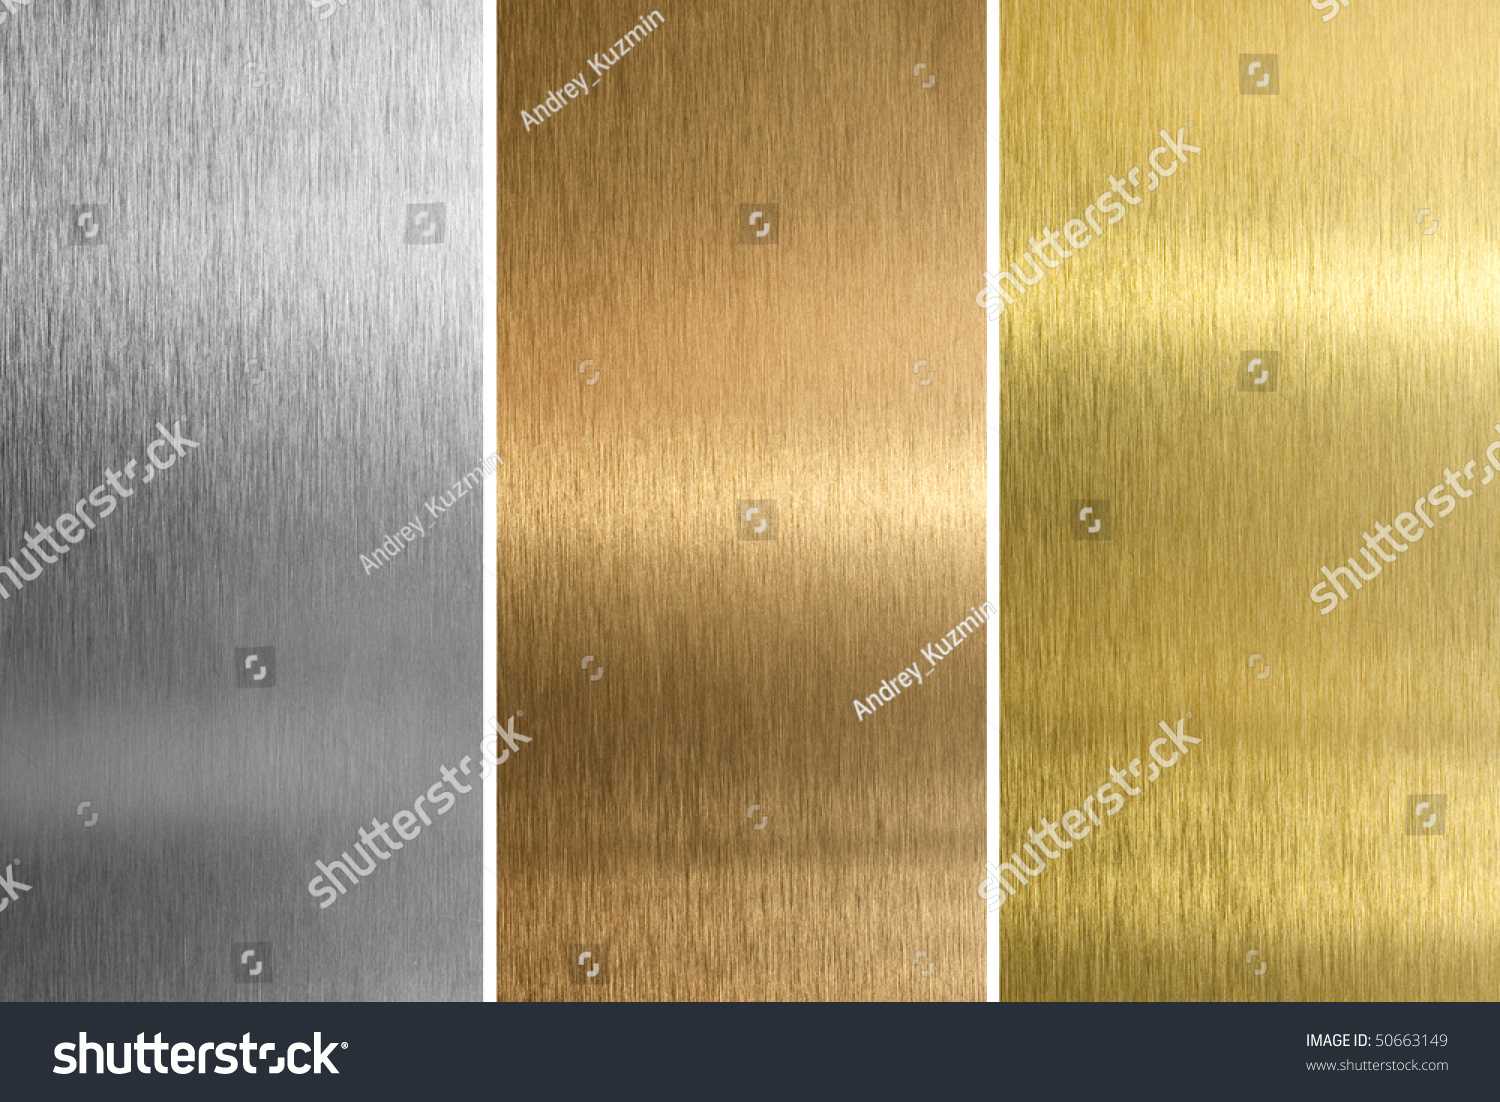 Metallic Background Textures Brushed Metal Collection Stock Photo ...